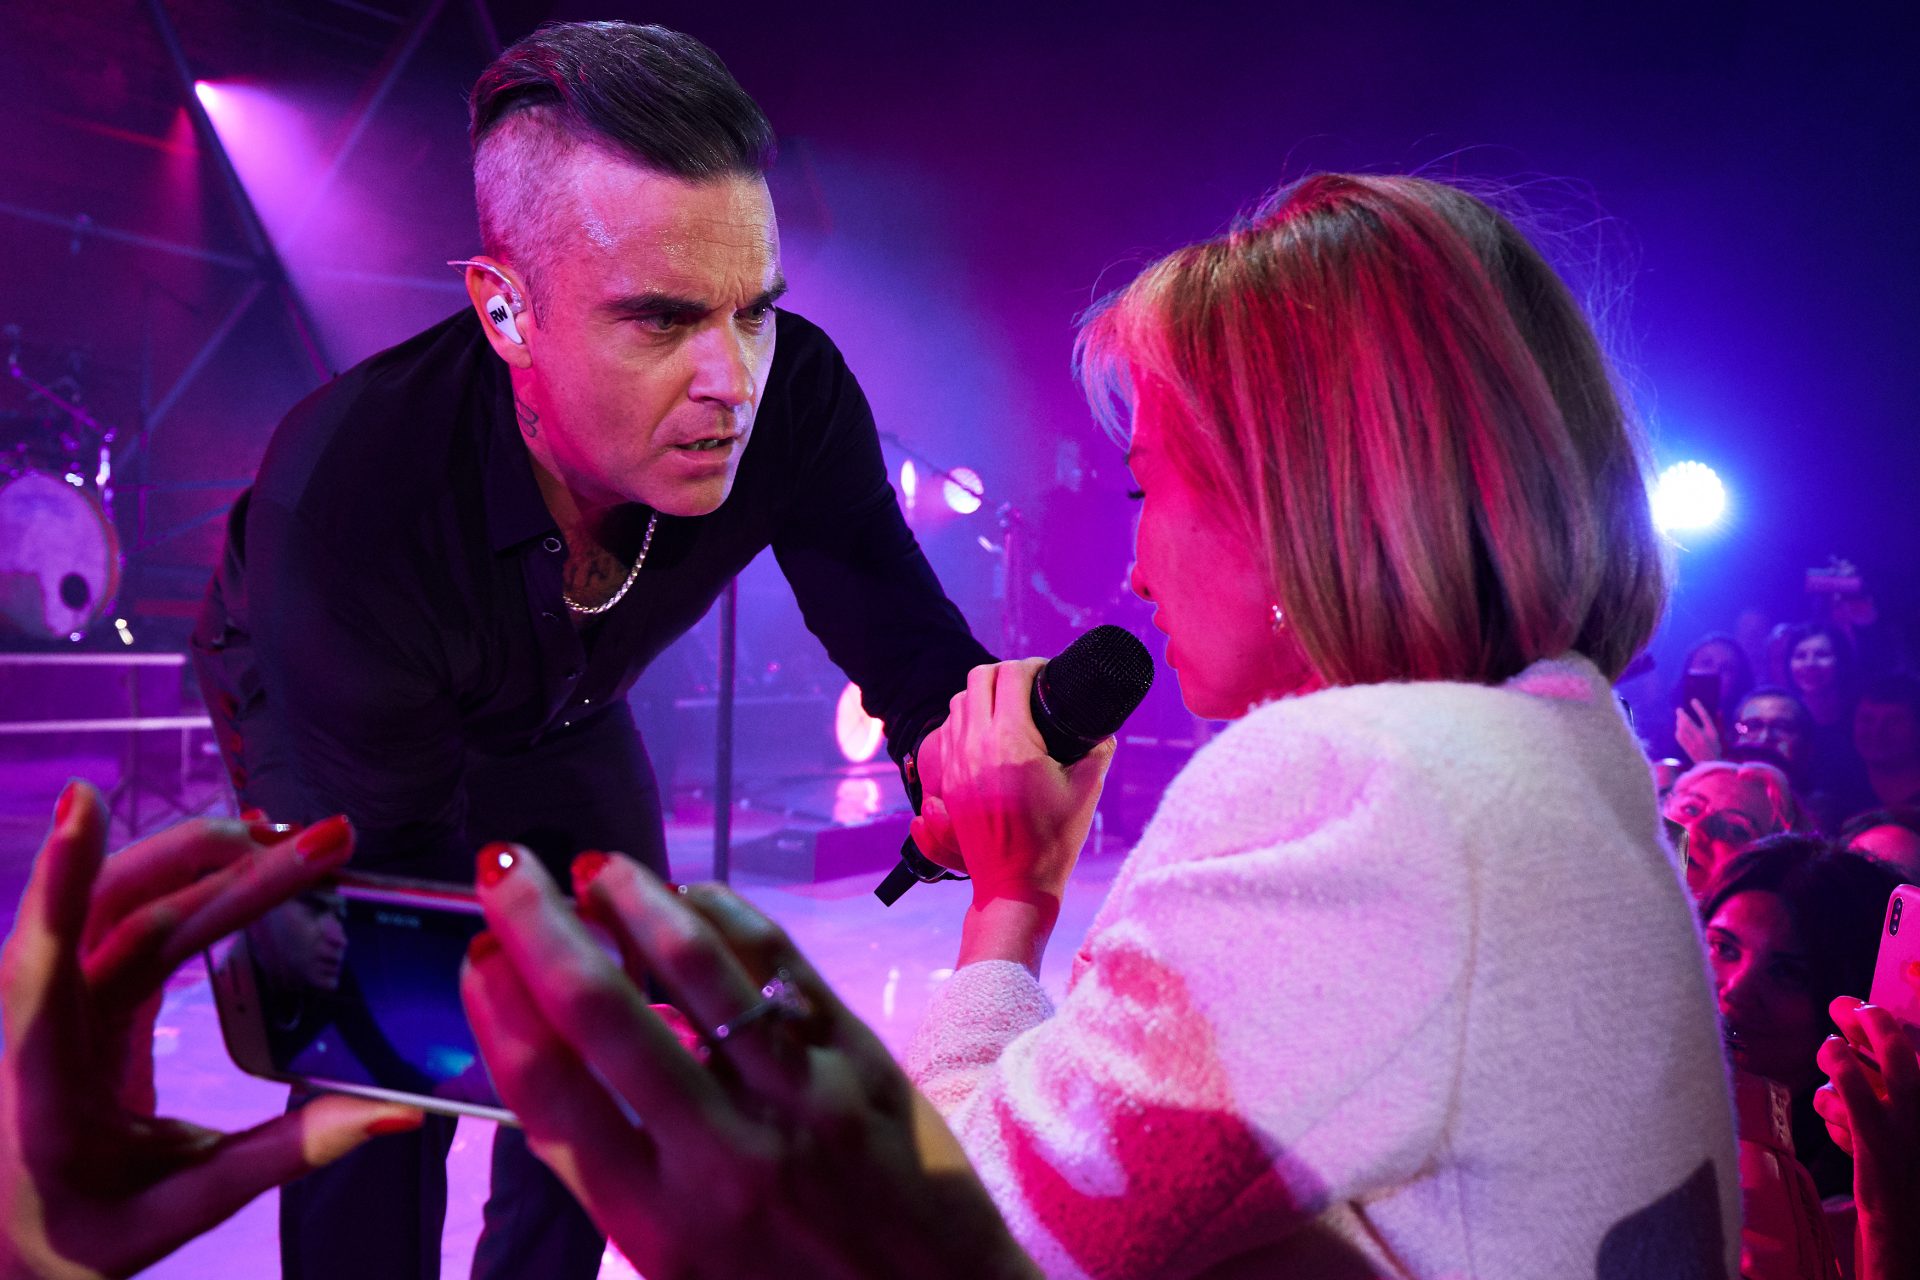 Drama at a Robbie Williams concert